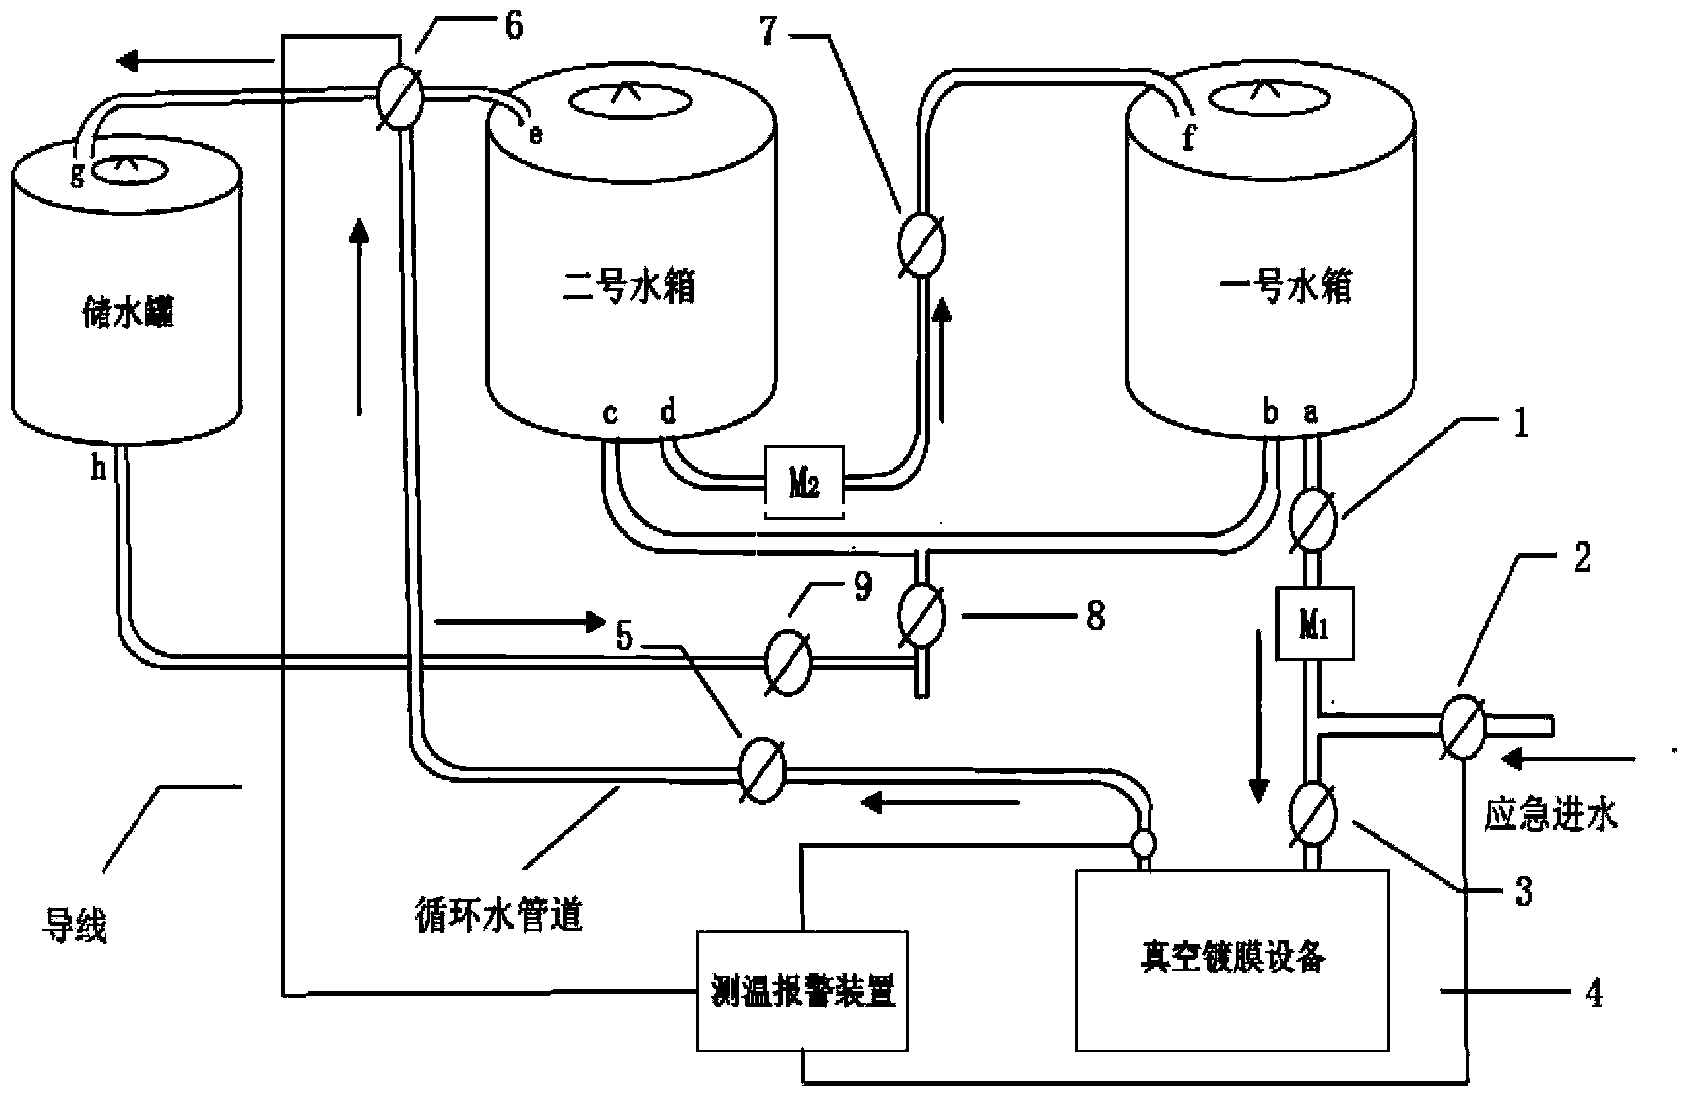 Water temperature control circulating cooling system for diffusion pump of vacuum coating machine